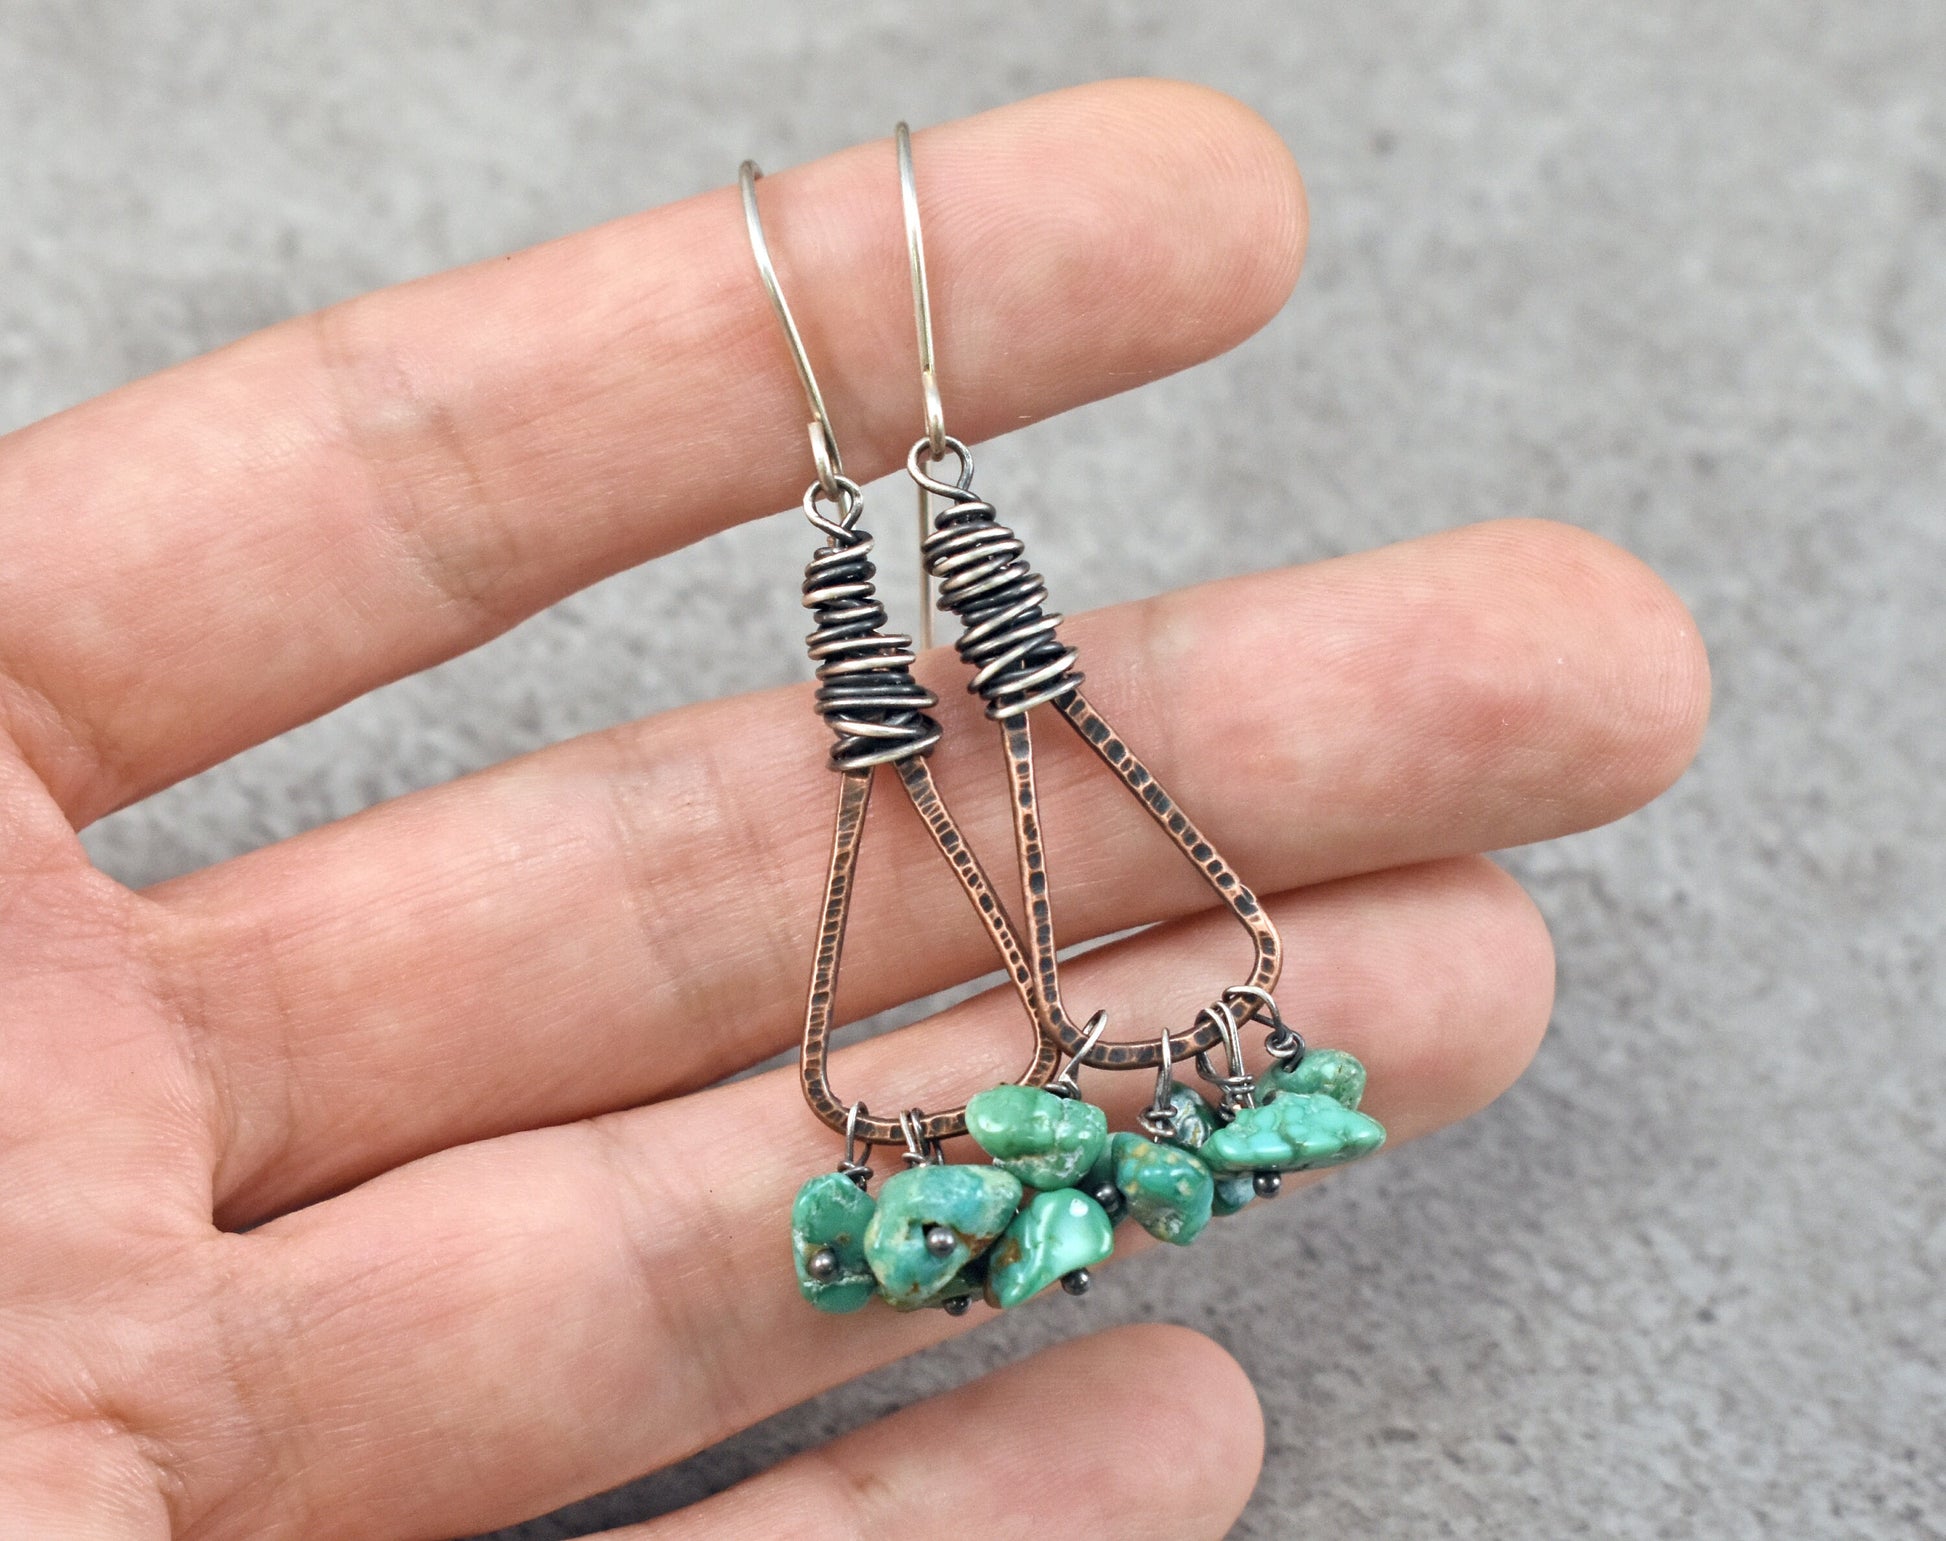 Green Turquoise Boho Triangle Earrings, Rustic Mixed Metal Jewelry Handmade, Unique Copper Sterling Silver Dangles